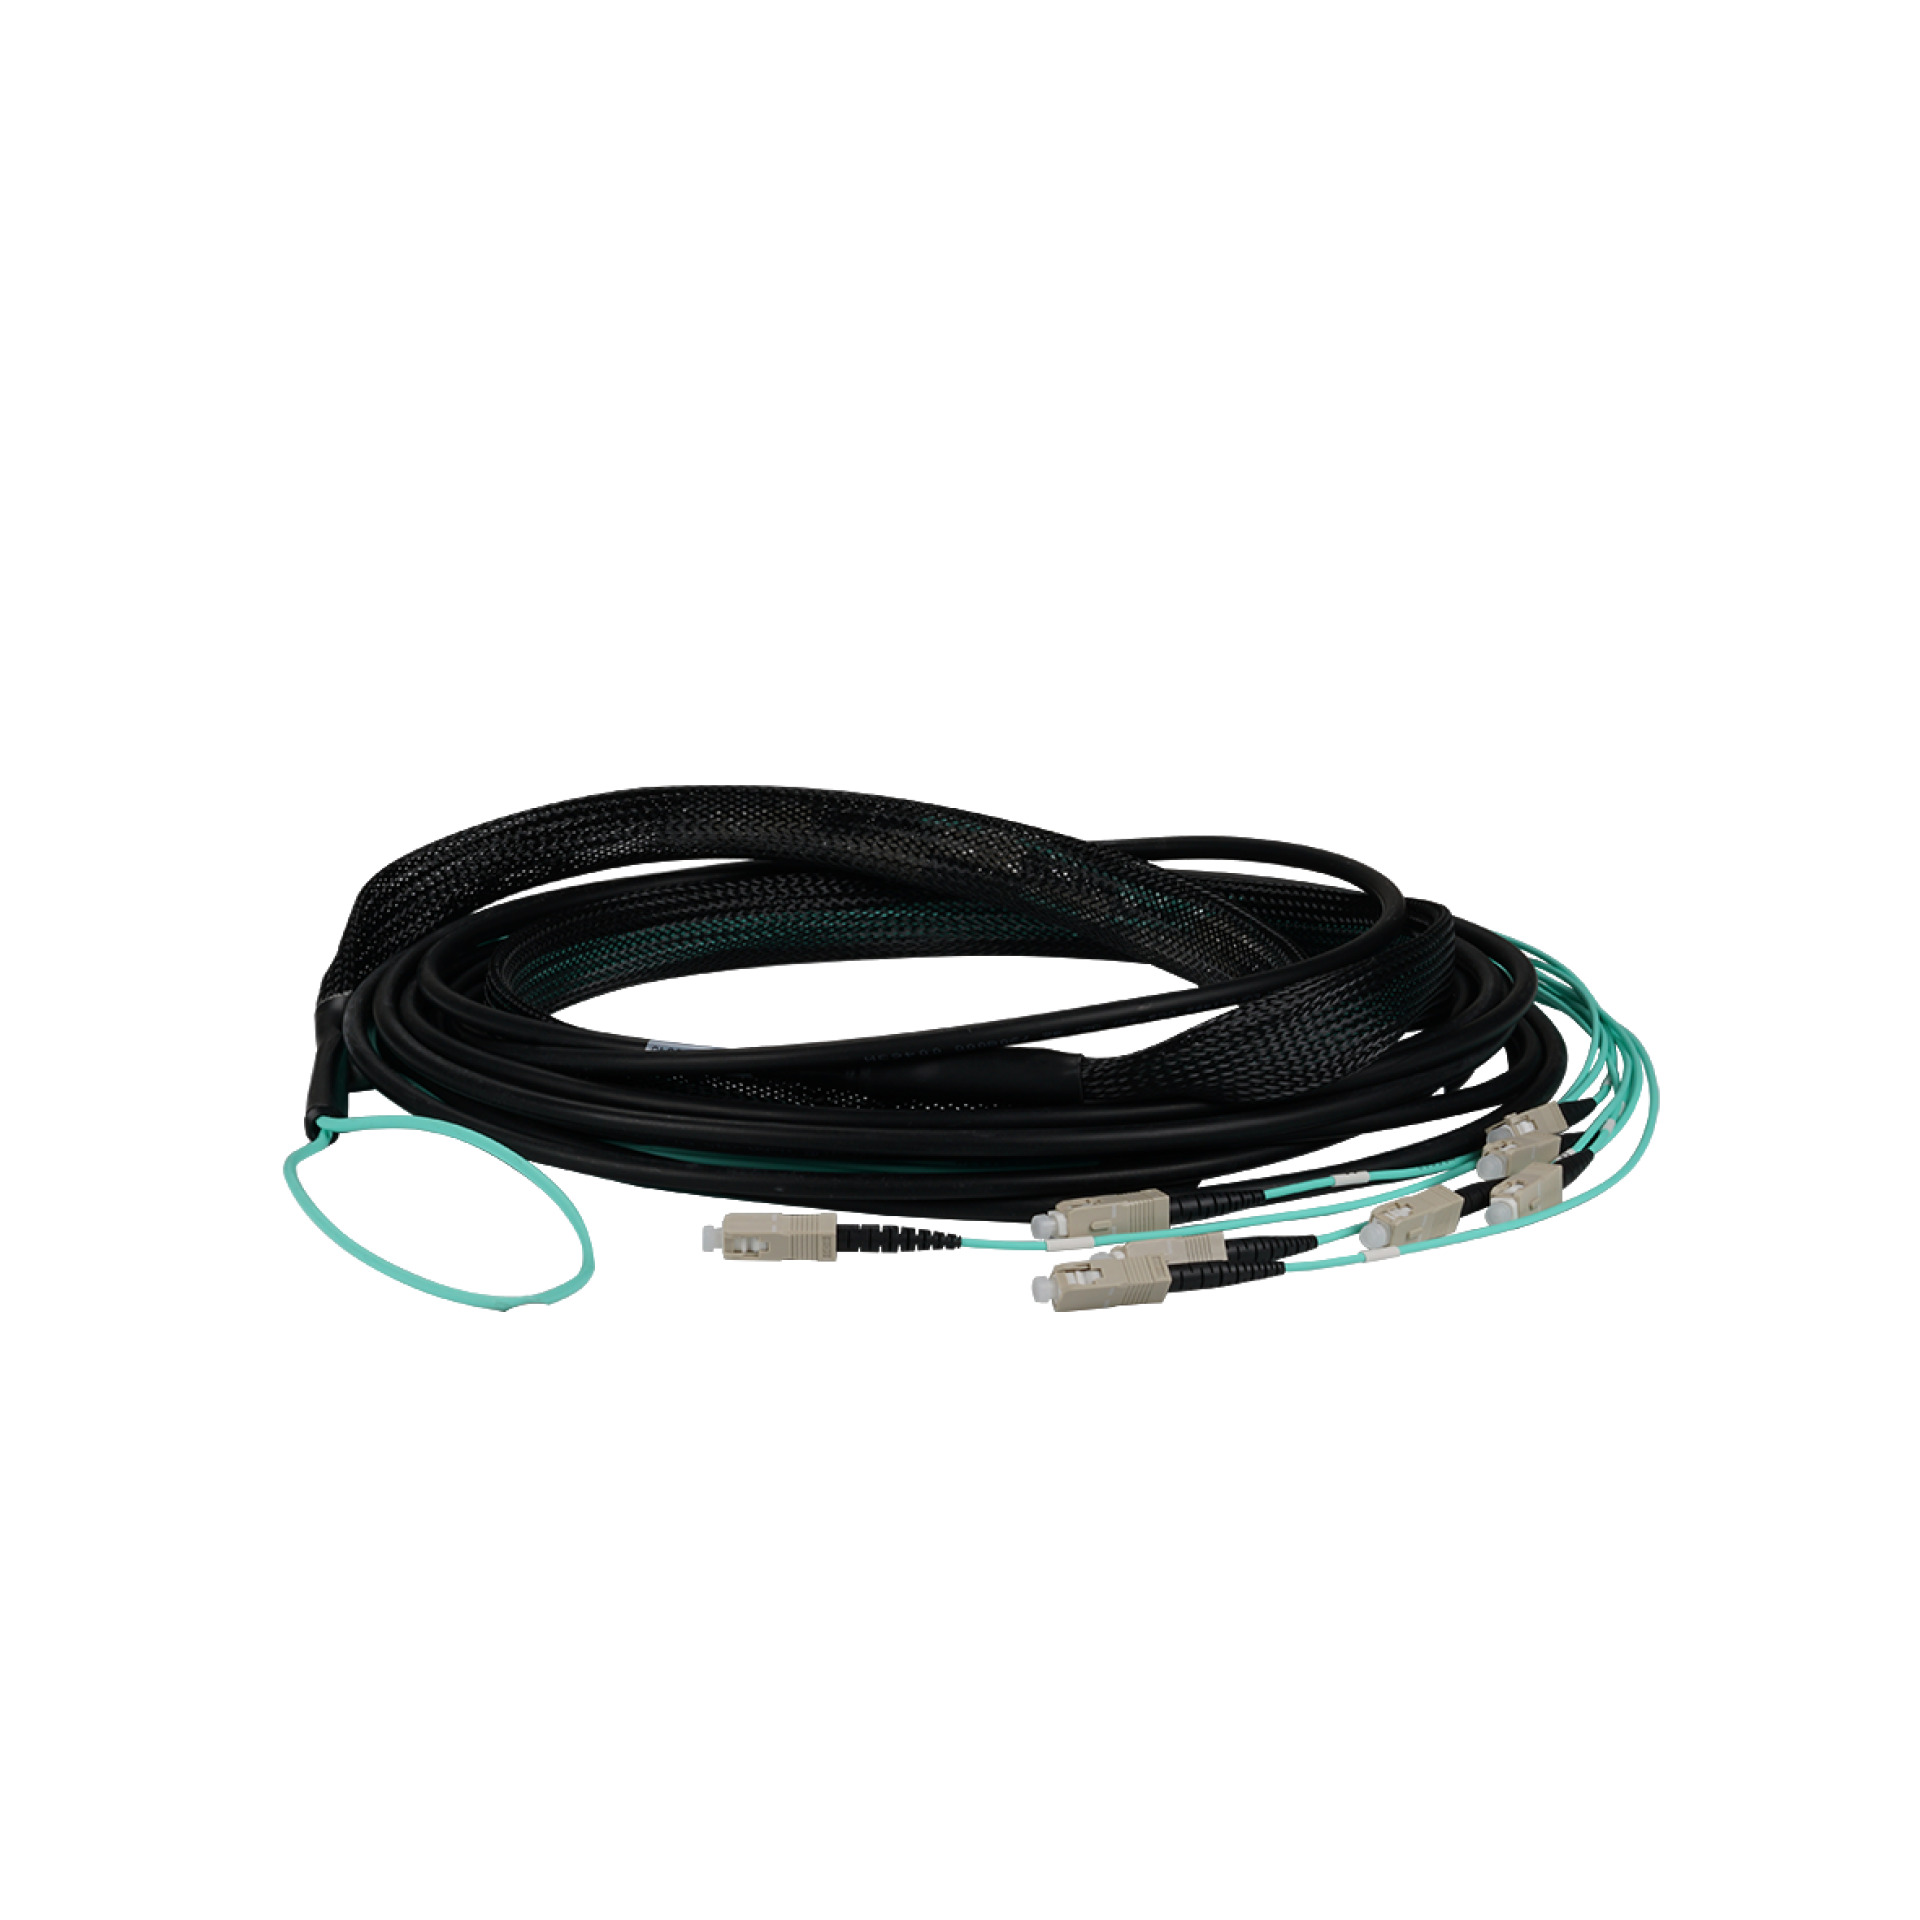 Trunk cable U-DQ(ZN)BH 8G 50/125, SC/SC OM3 20m